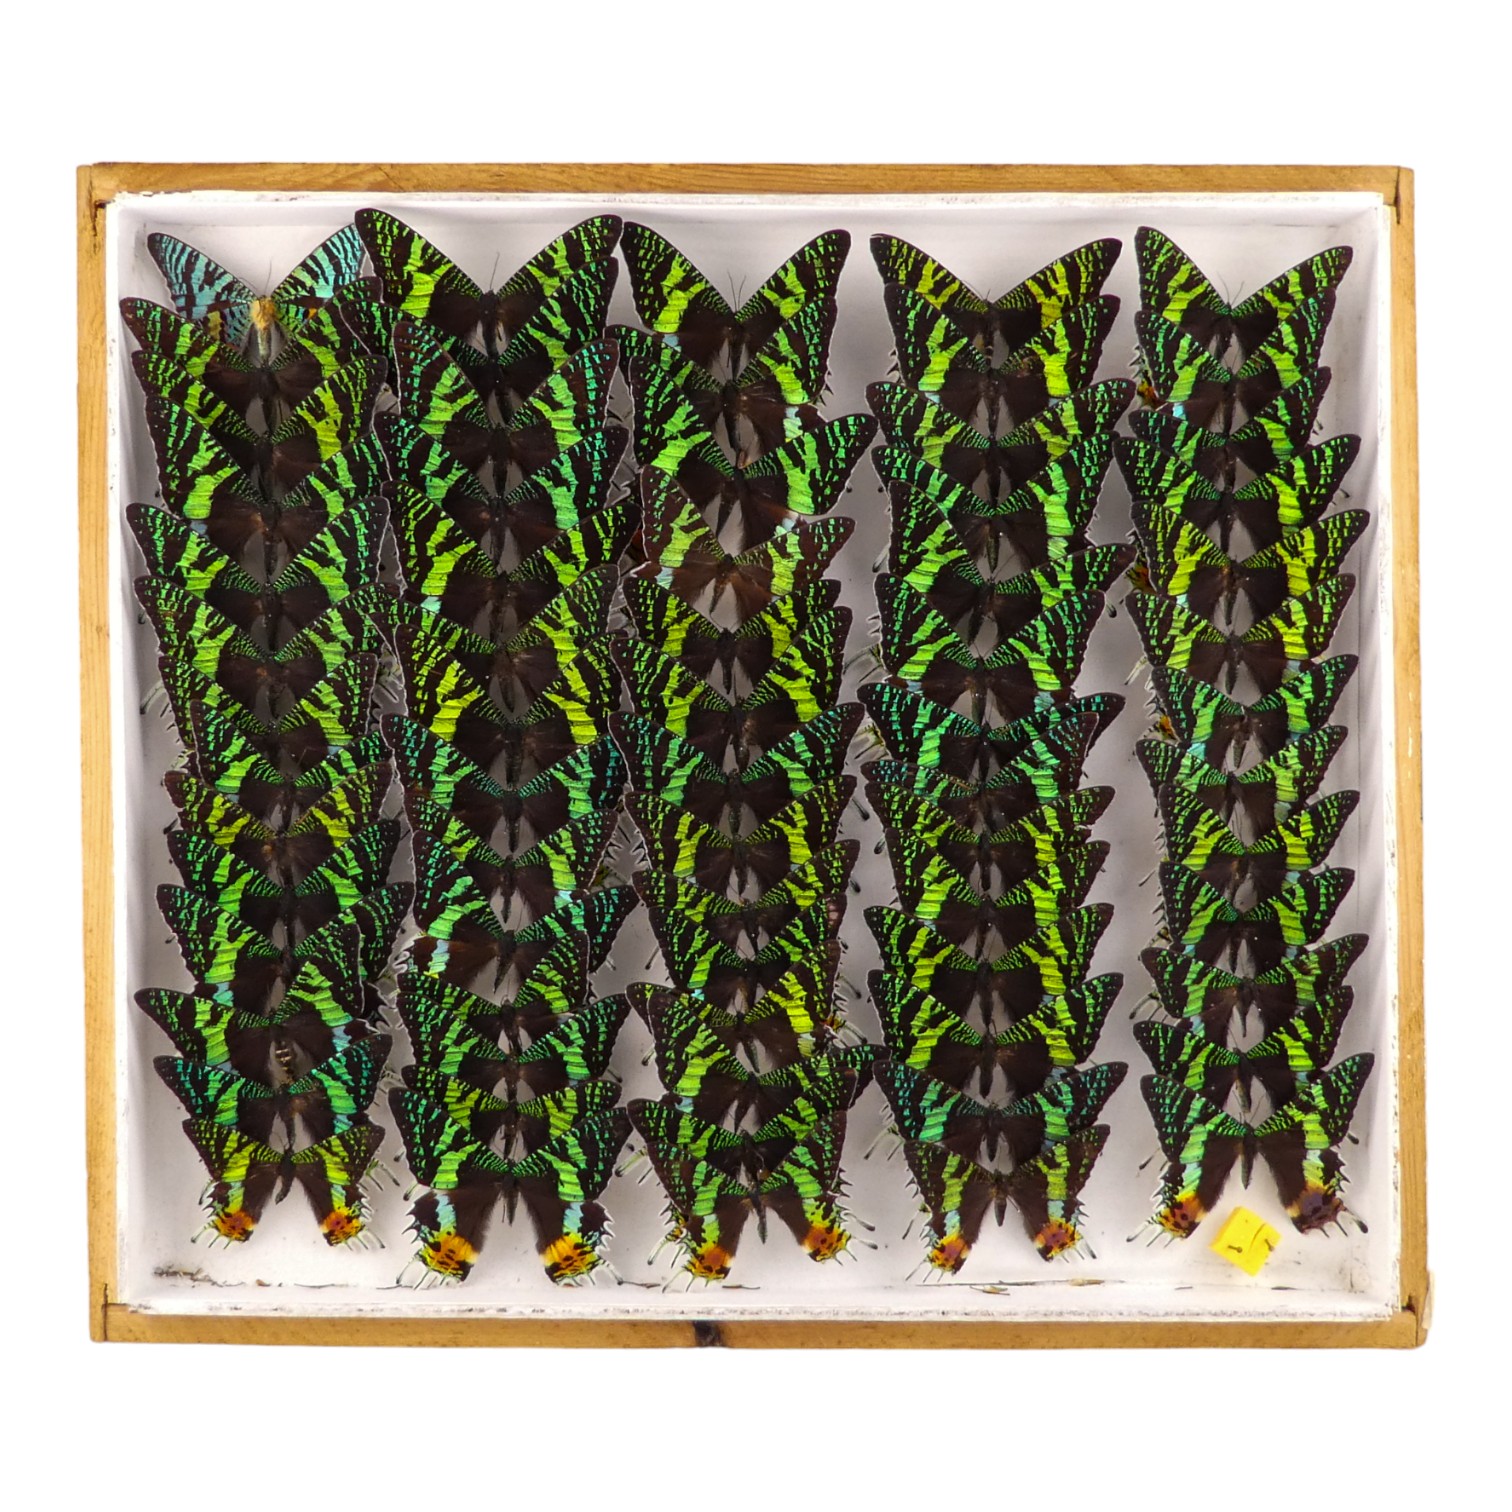 A case of Madagascan Sunset Moth - arranged in five rows